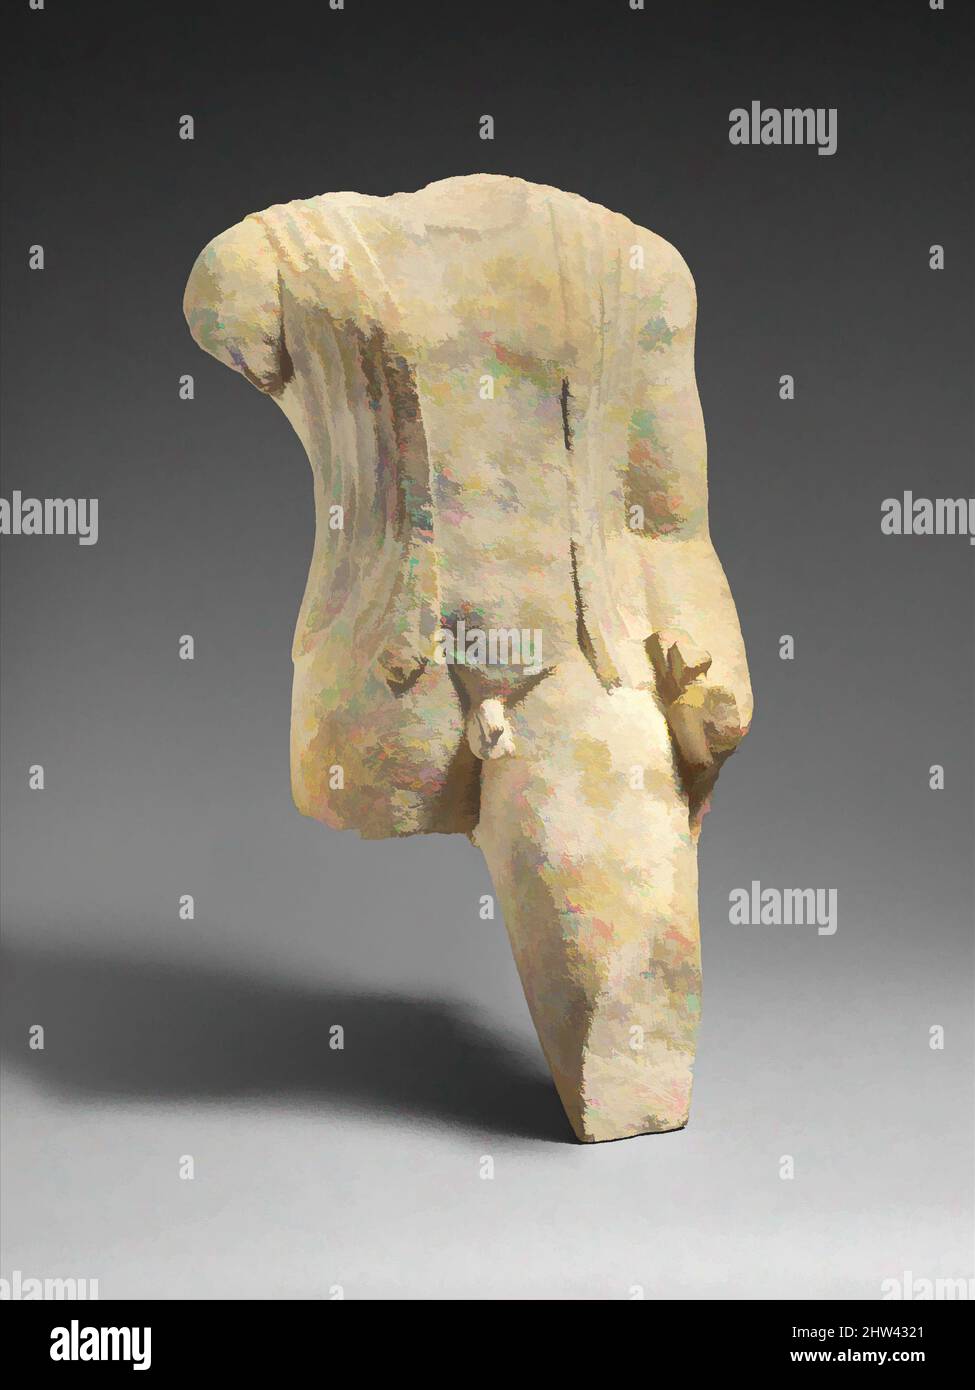 Art inspired by Limestone figure of a draped man, Cypro-Archaic II, late 6th century B.C., Cypriot, Limestone, Overall: 15 1/2 x 9 x 7 1/4 in. (39.4 x 22.9 x 18.4 cm), Stone Sculpture, The figure carries a sword, bow, quiver, and a flask or bag, Classic works modernized by Artotop with a splash of modernity. Shapes, color and value, eye-catching visual impact on art. Emotions through freedom of artworks in a contemporary way. A timeless message pursuing a wildly creative new direction. Artists turning to the digital medium and creating the Artotop NFT Stock Photo